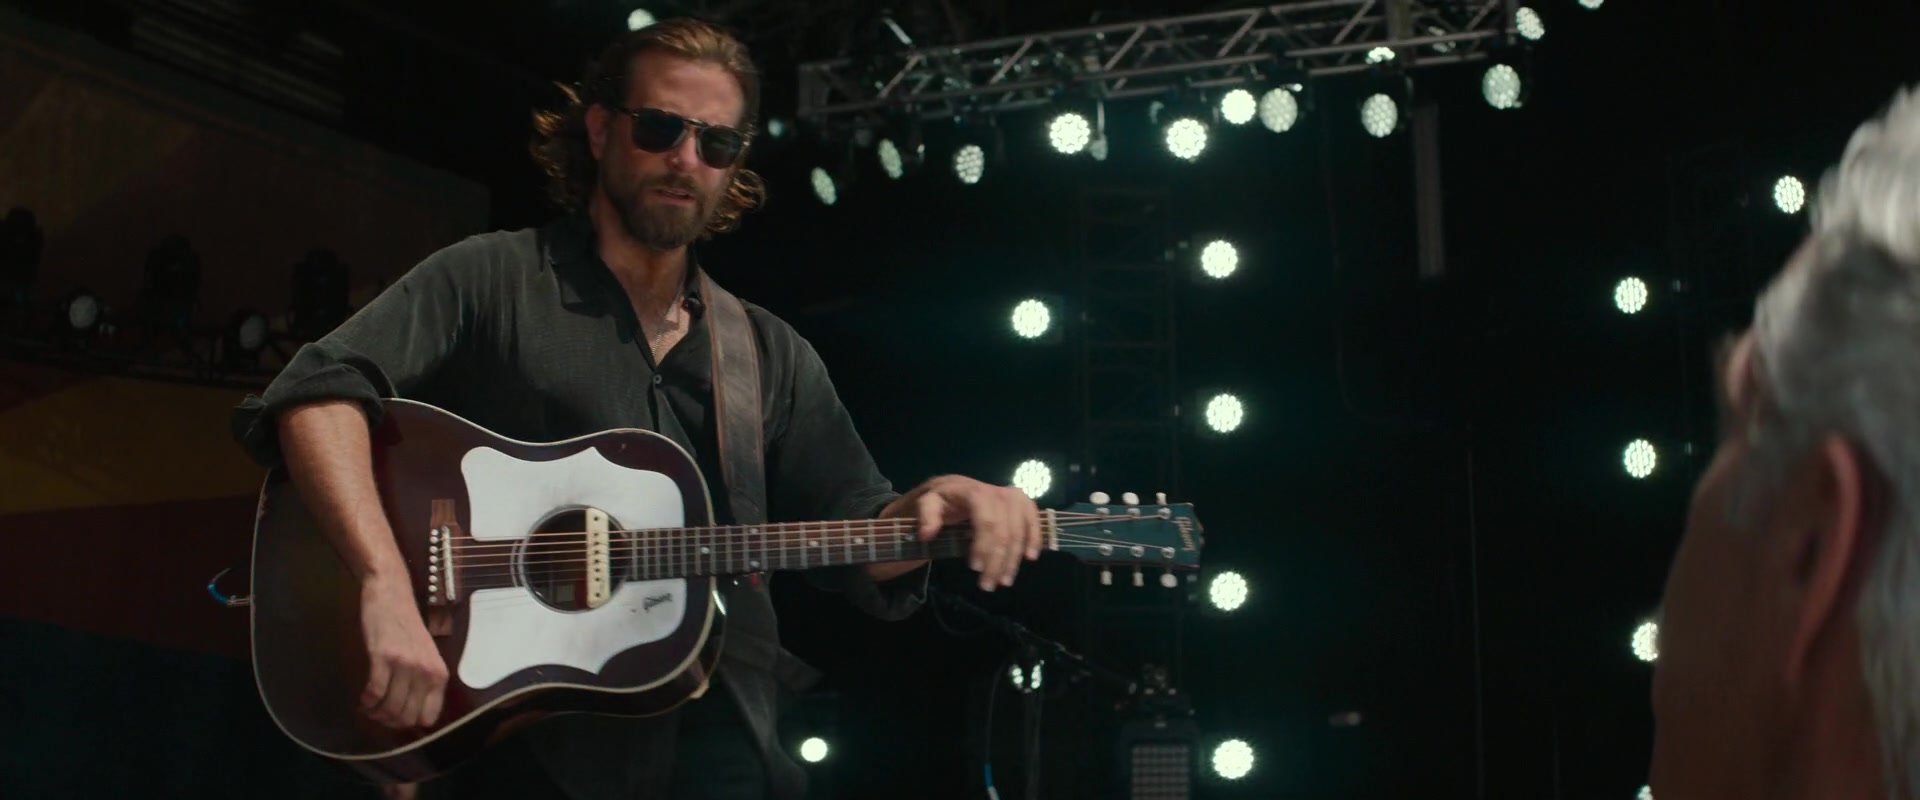 Gibson Guitar Used by Bradley Cooper in A Star Is Born (2018) Movie1920 x 800